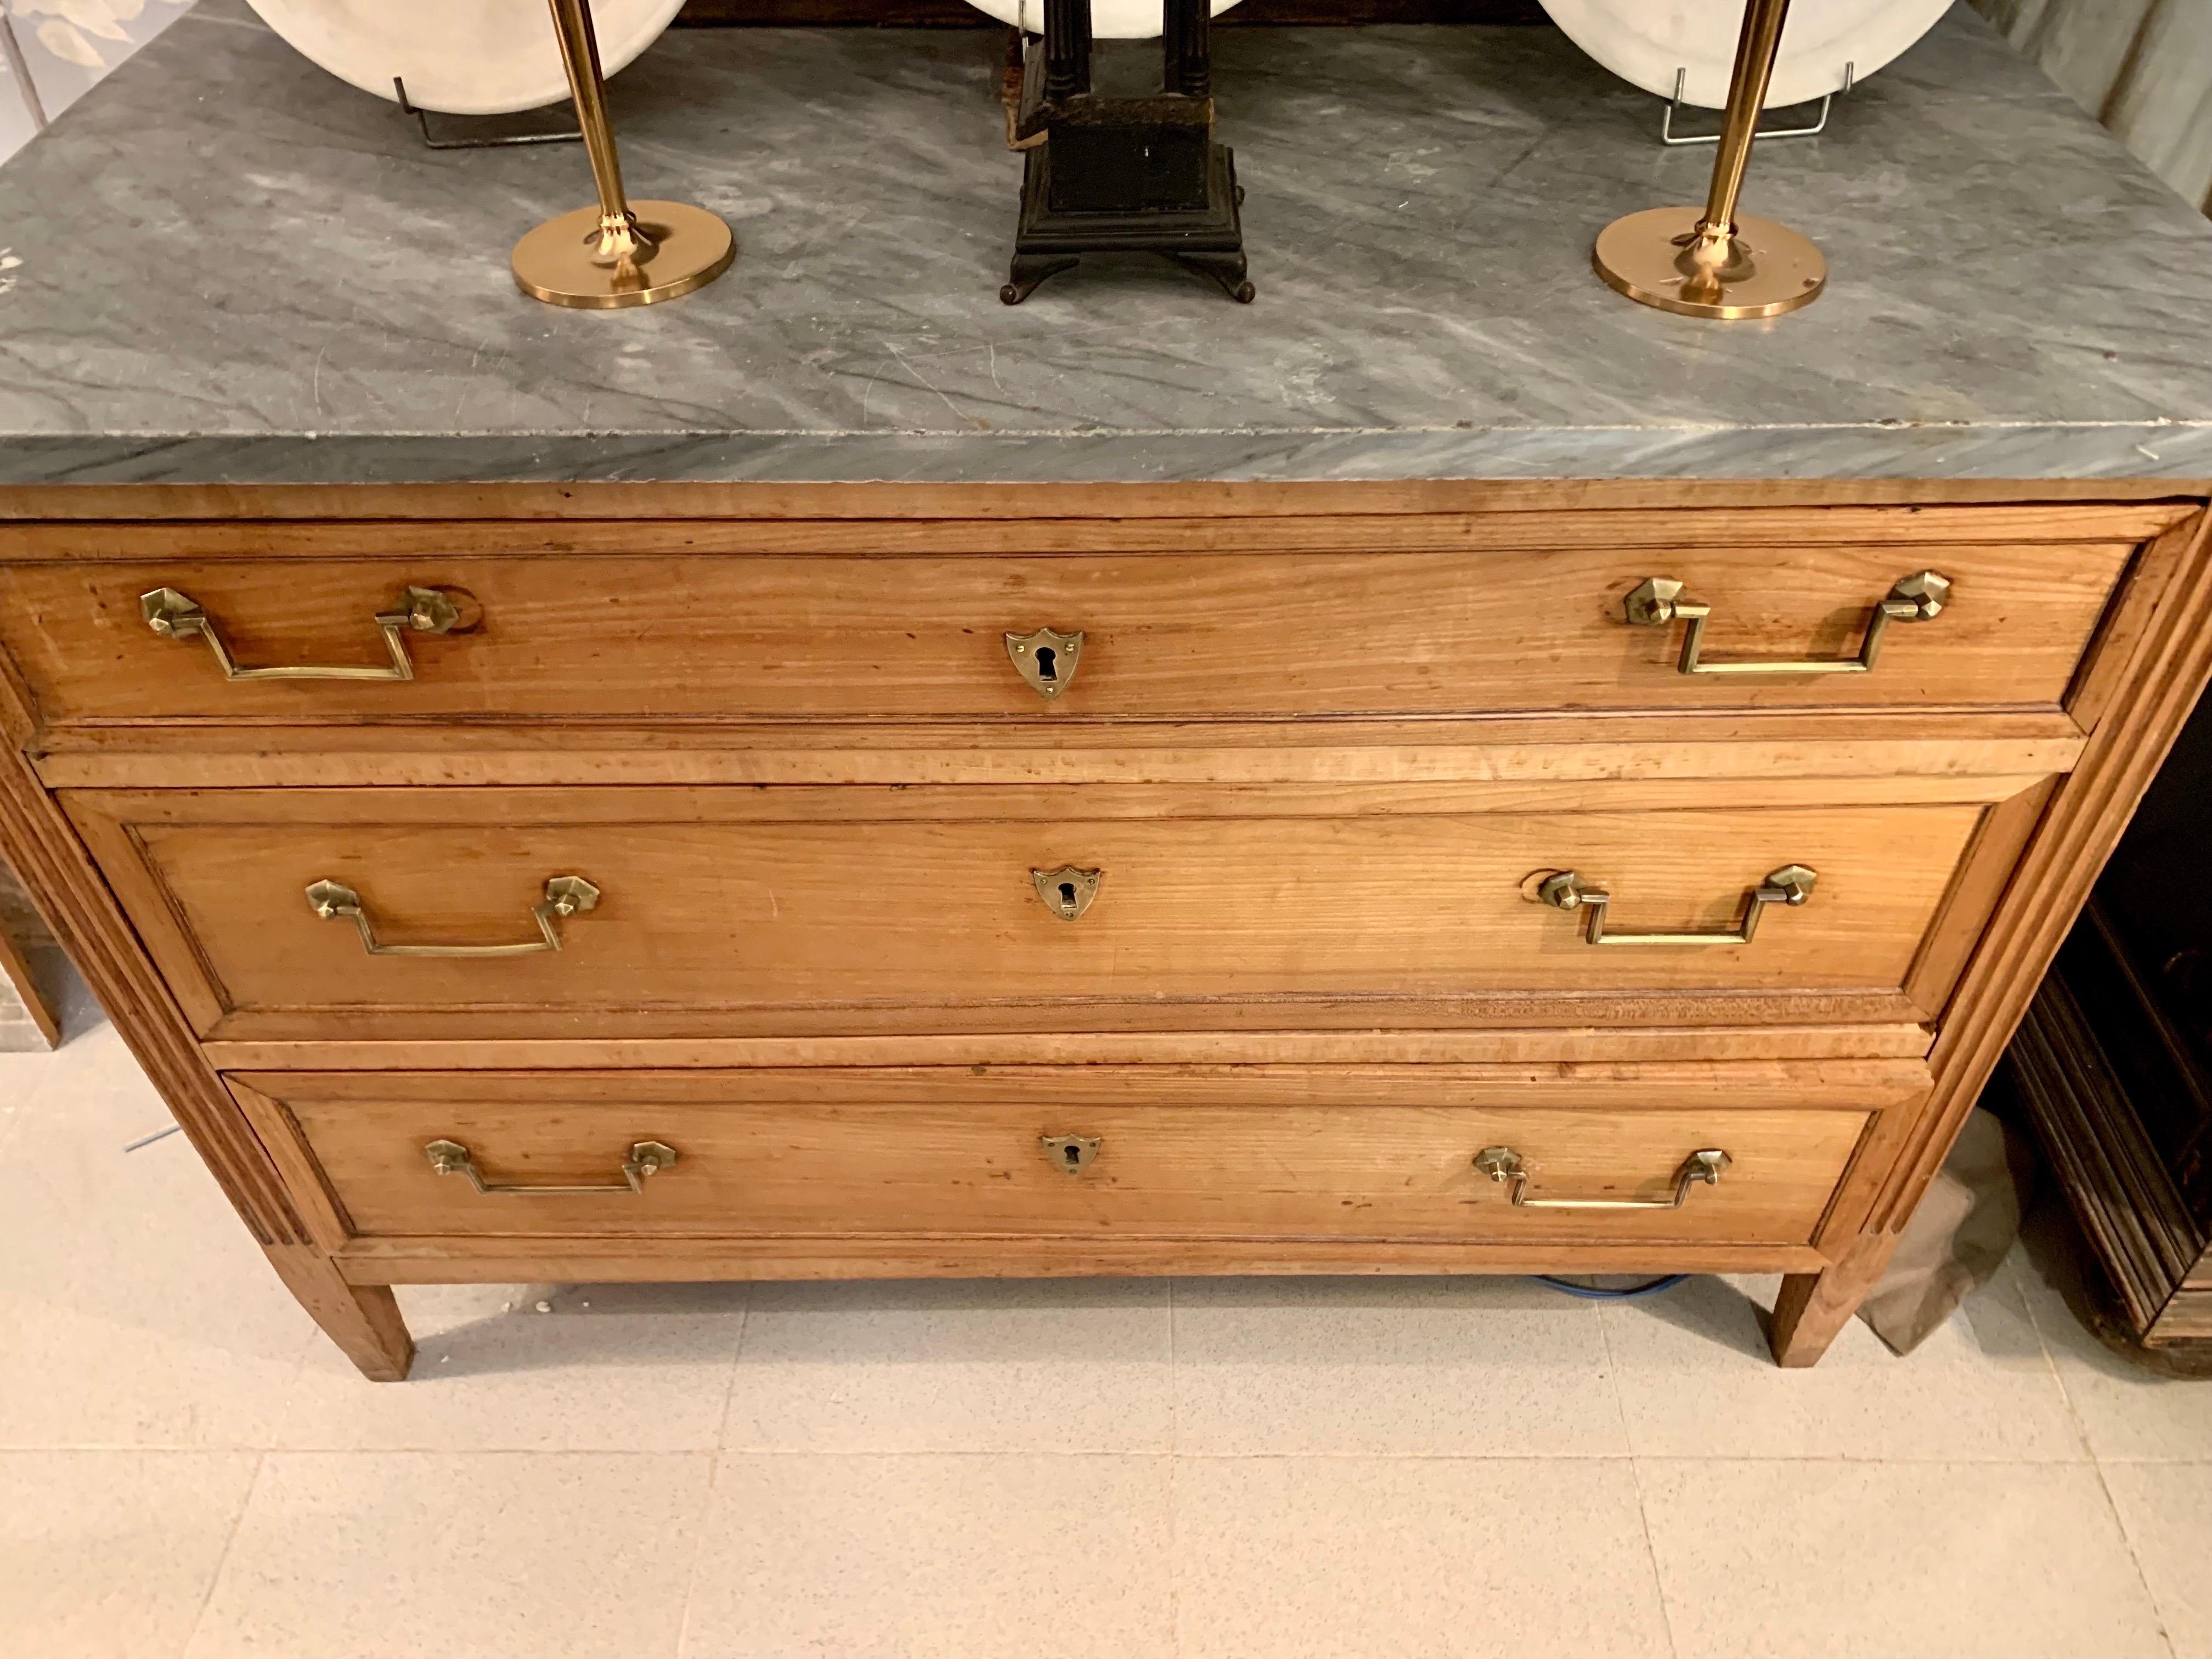 A chest of drawers from the early 19th century, which continues the Louis XVI style, in fruit wood with three drawers and a gray veined marble top.
the handles are bronze, two of them slightly smaller, the sides of the chest of drawers in ribbed